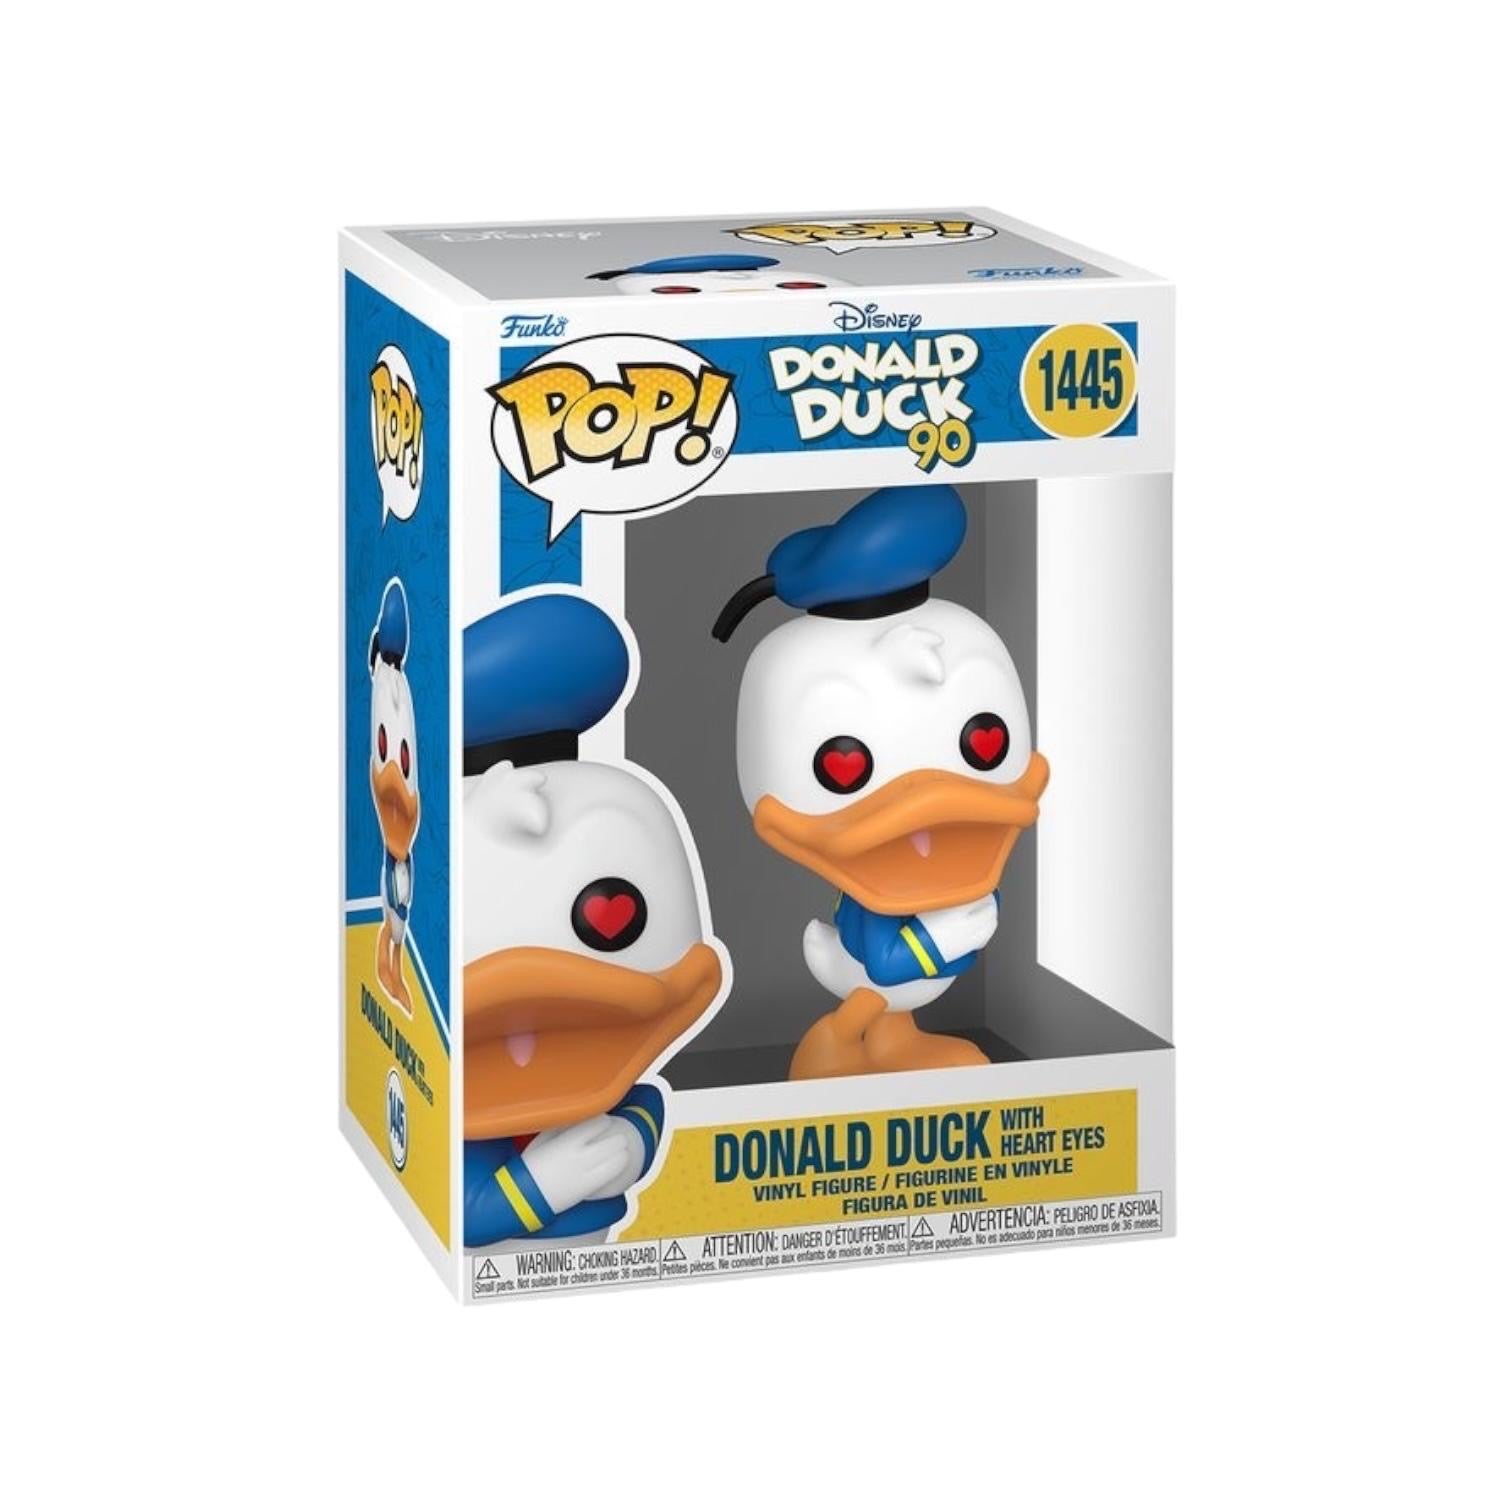 Donald Duck With Heart Eyes #1445 Funko Pop! - Donald Duck 90th - Disney